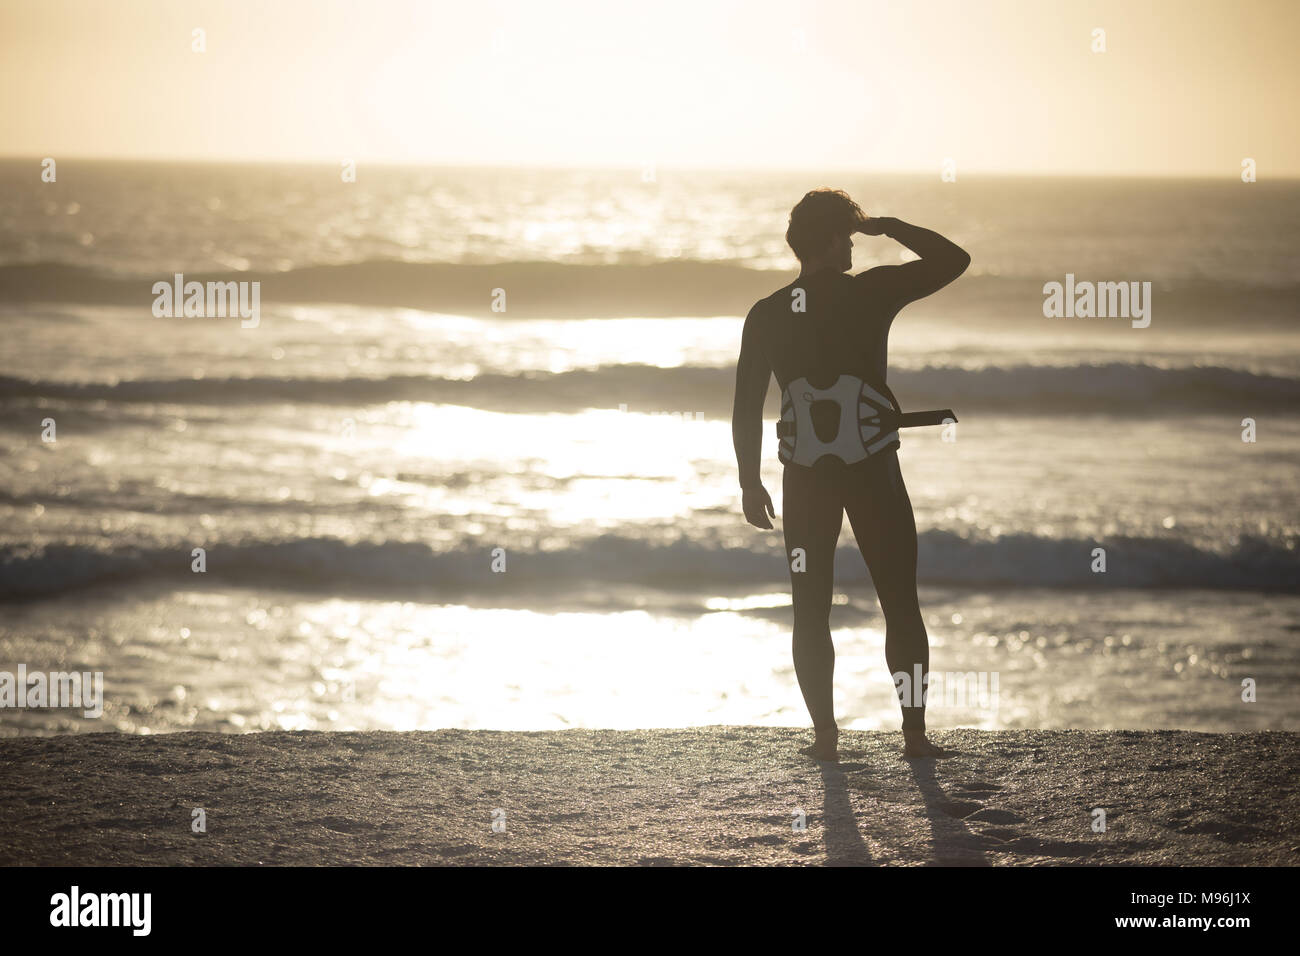 Male surfer standing in swimsuit and waist harness at beach Stock Photo